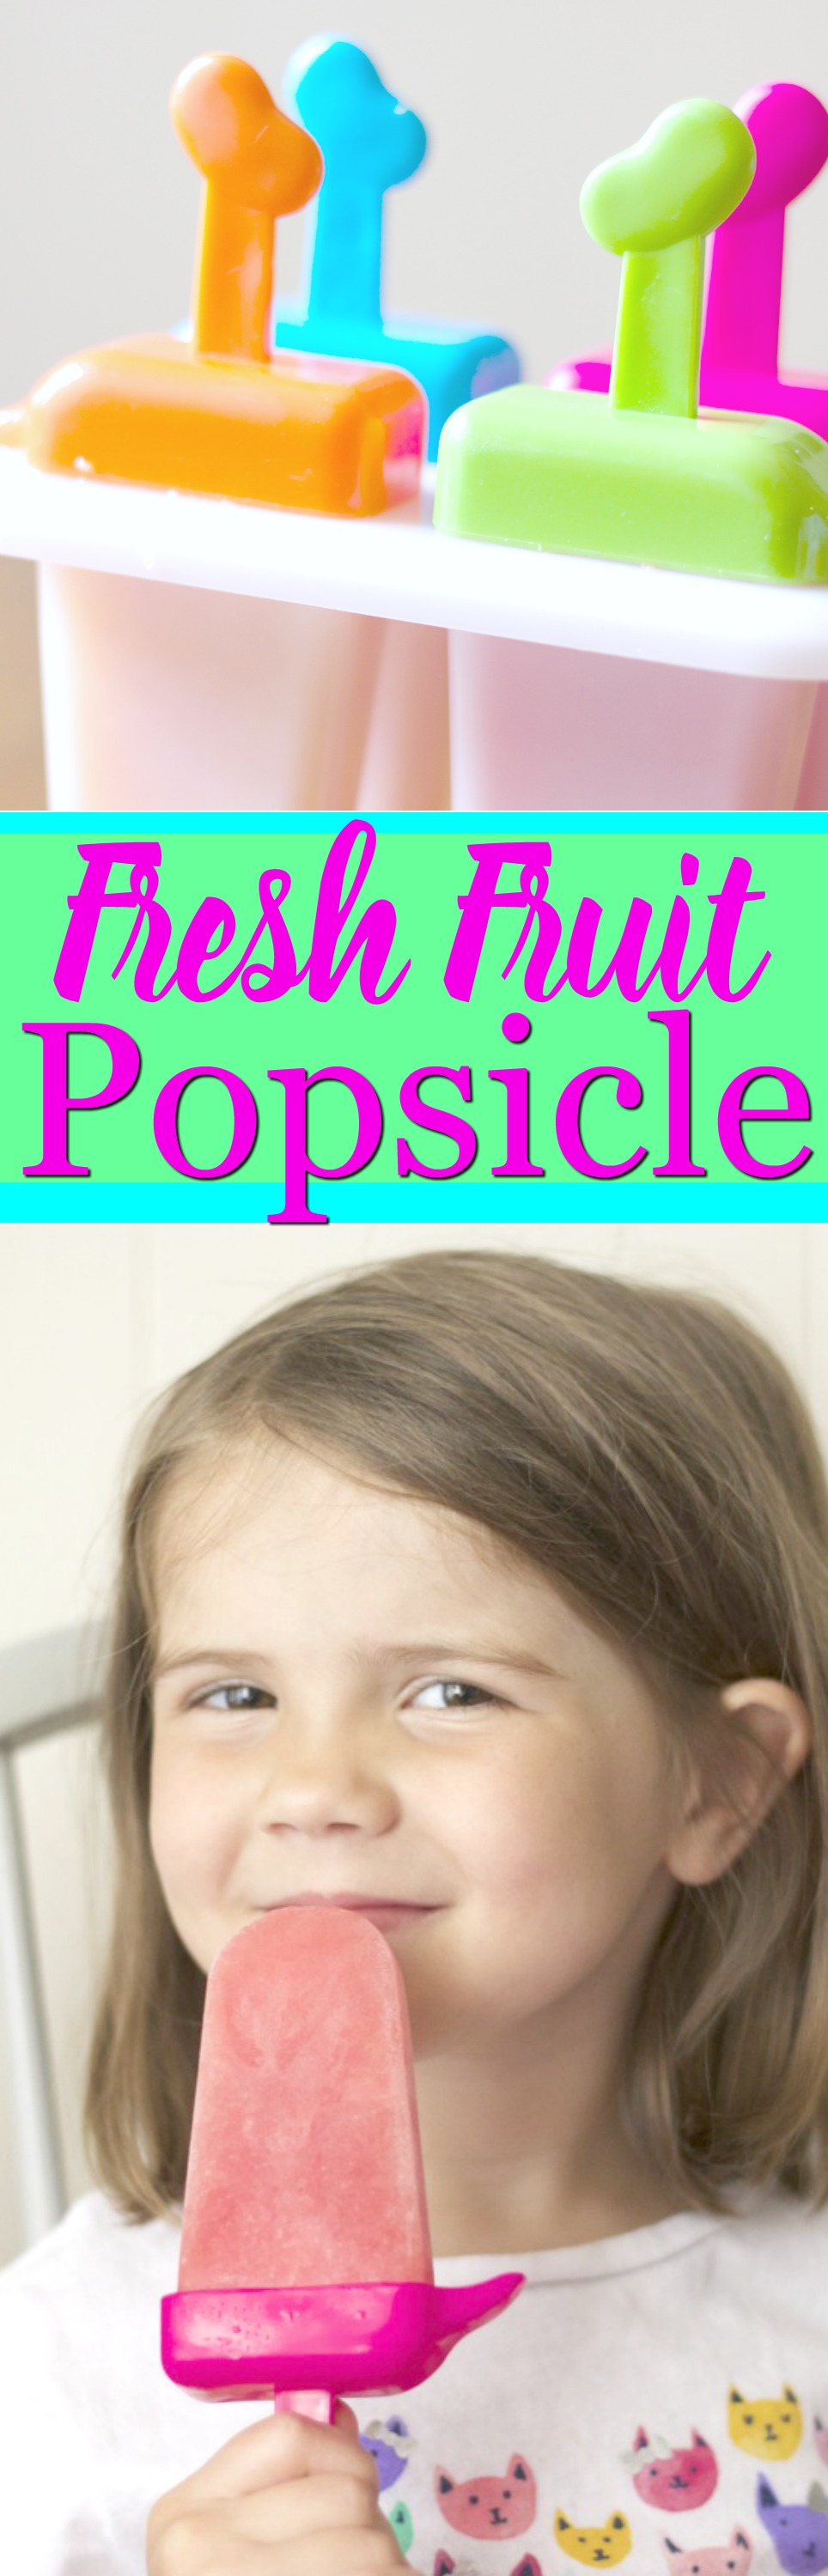 Fresh Fruit Popsicle- Stawberry and Peach Summer Popsicle, Kid friendly food and delicious